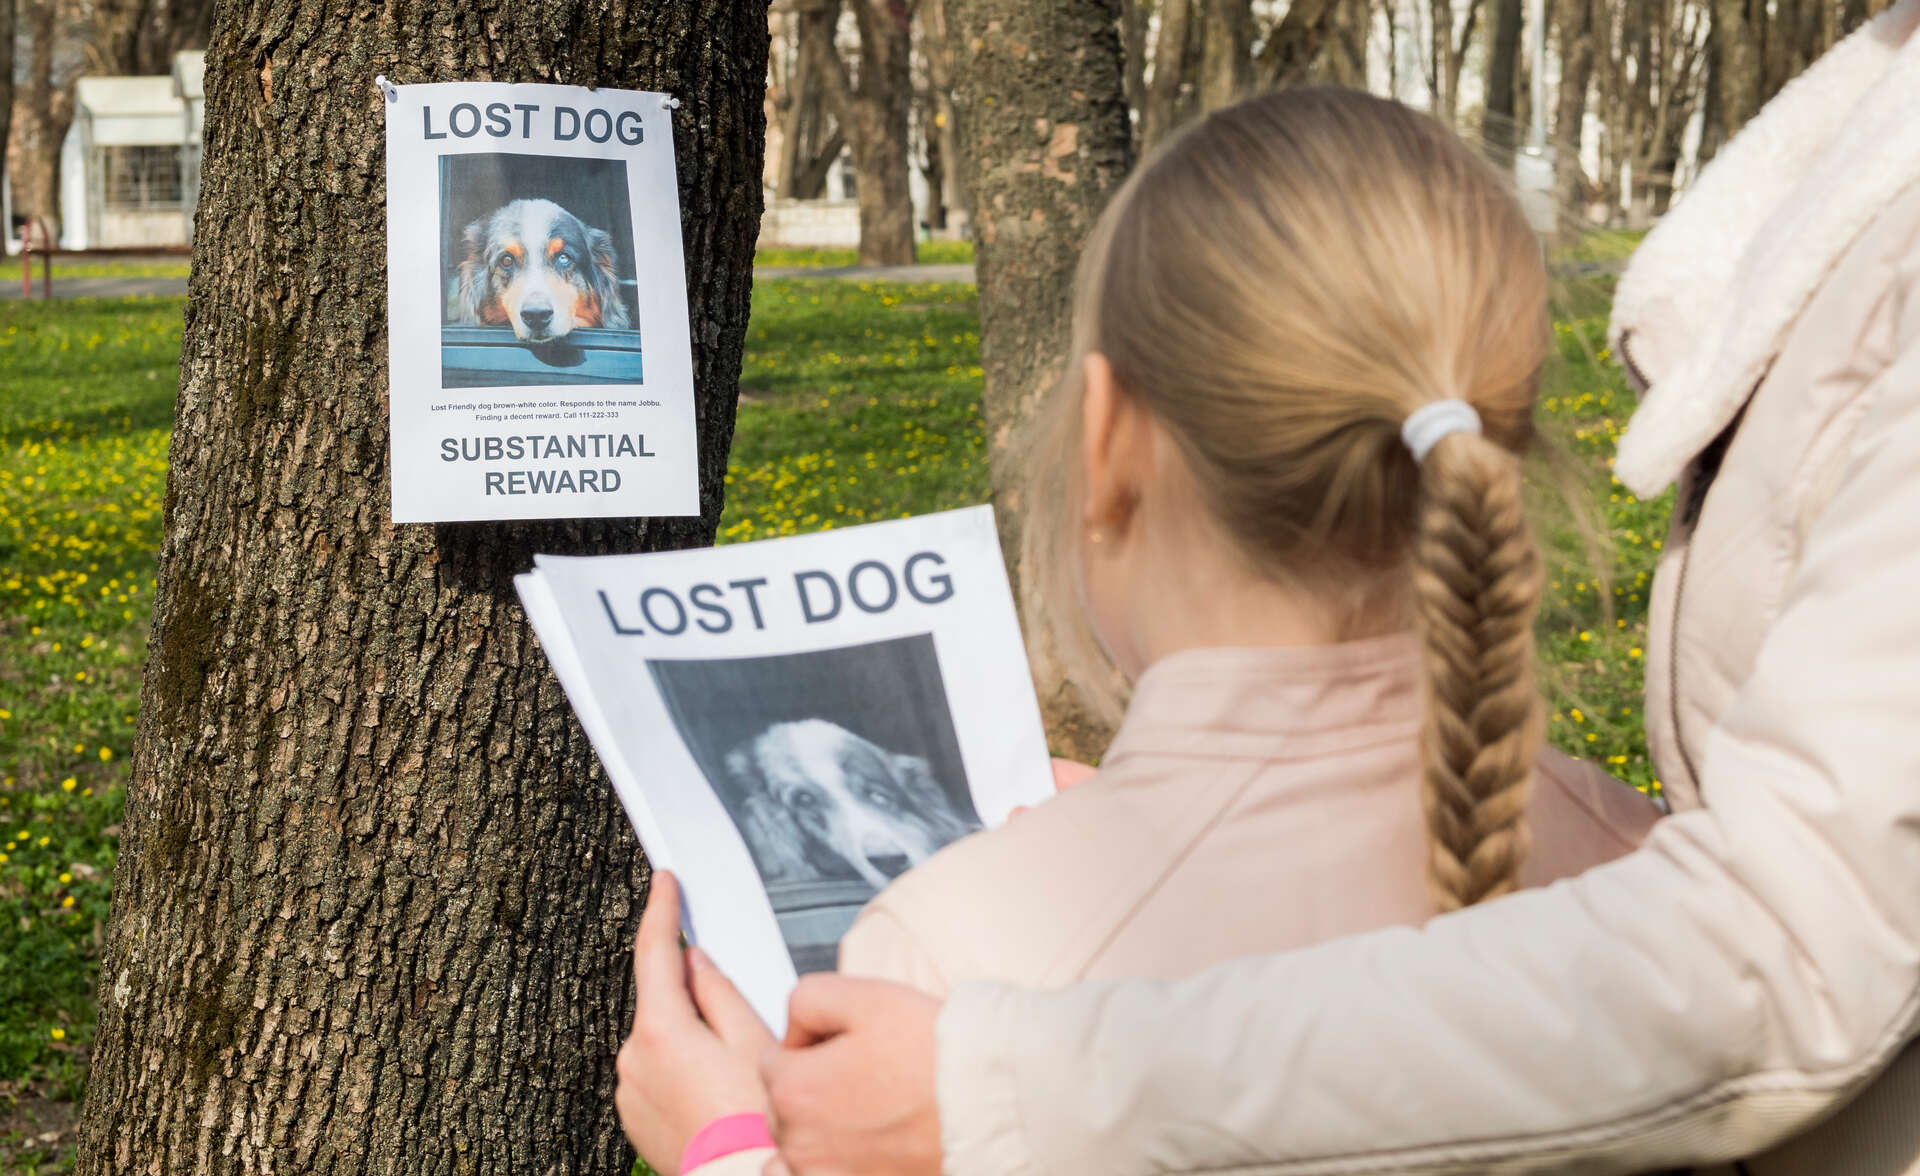 A family distributing "Lost dog" posters in a neighborhood